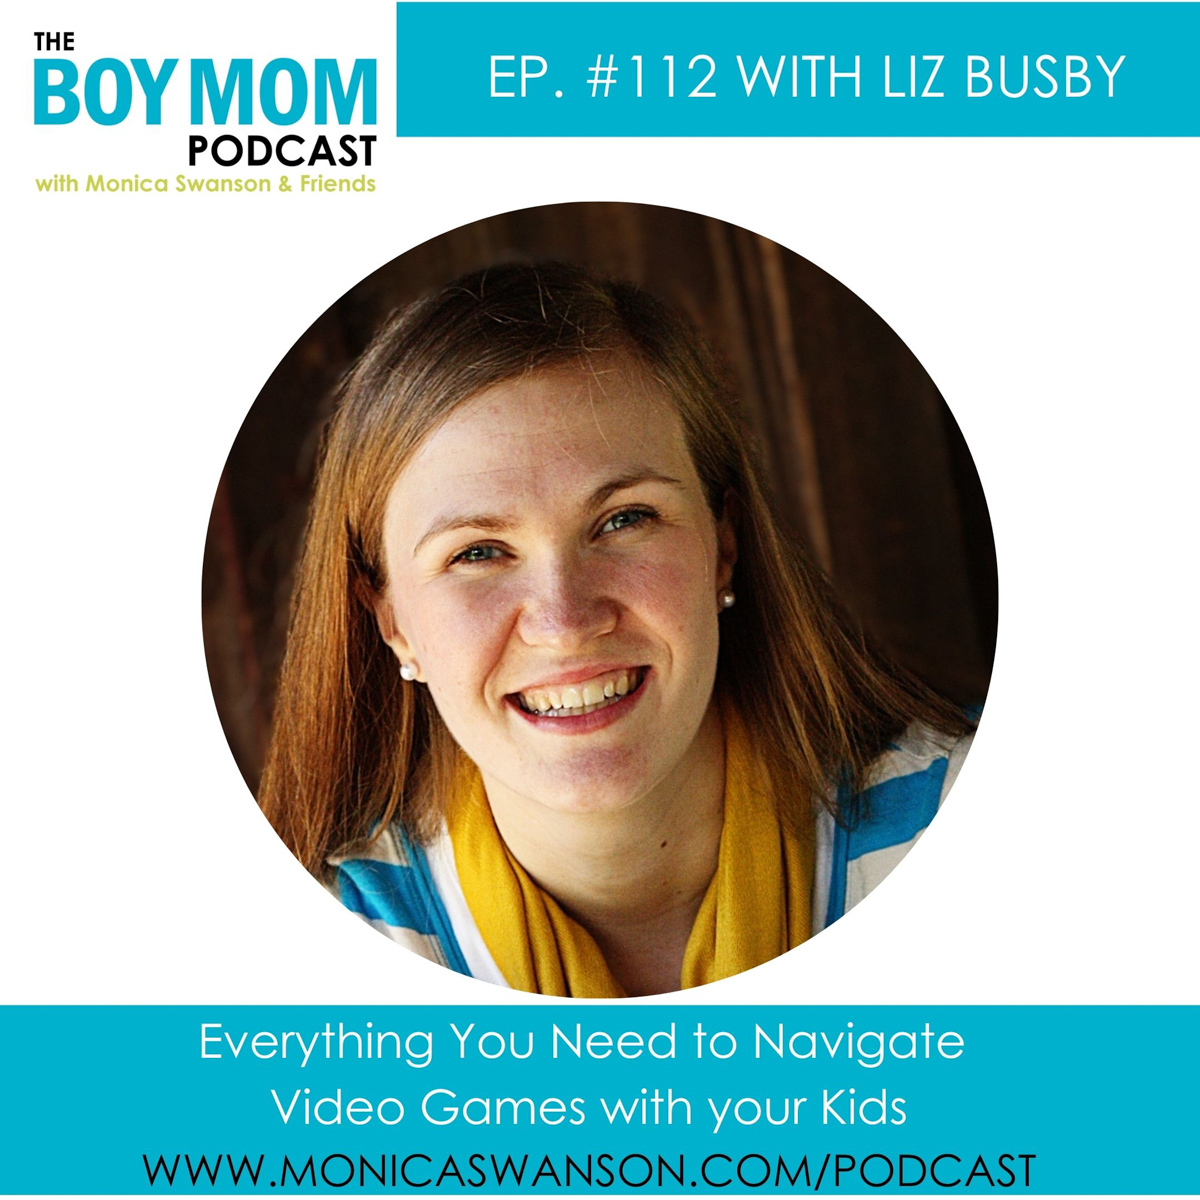 Everything You Need to Navigate Video Games with Your Kids {Episode 112, with Liz Busby}